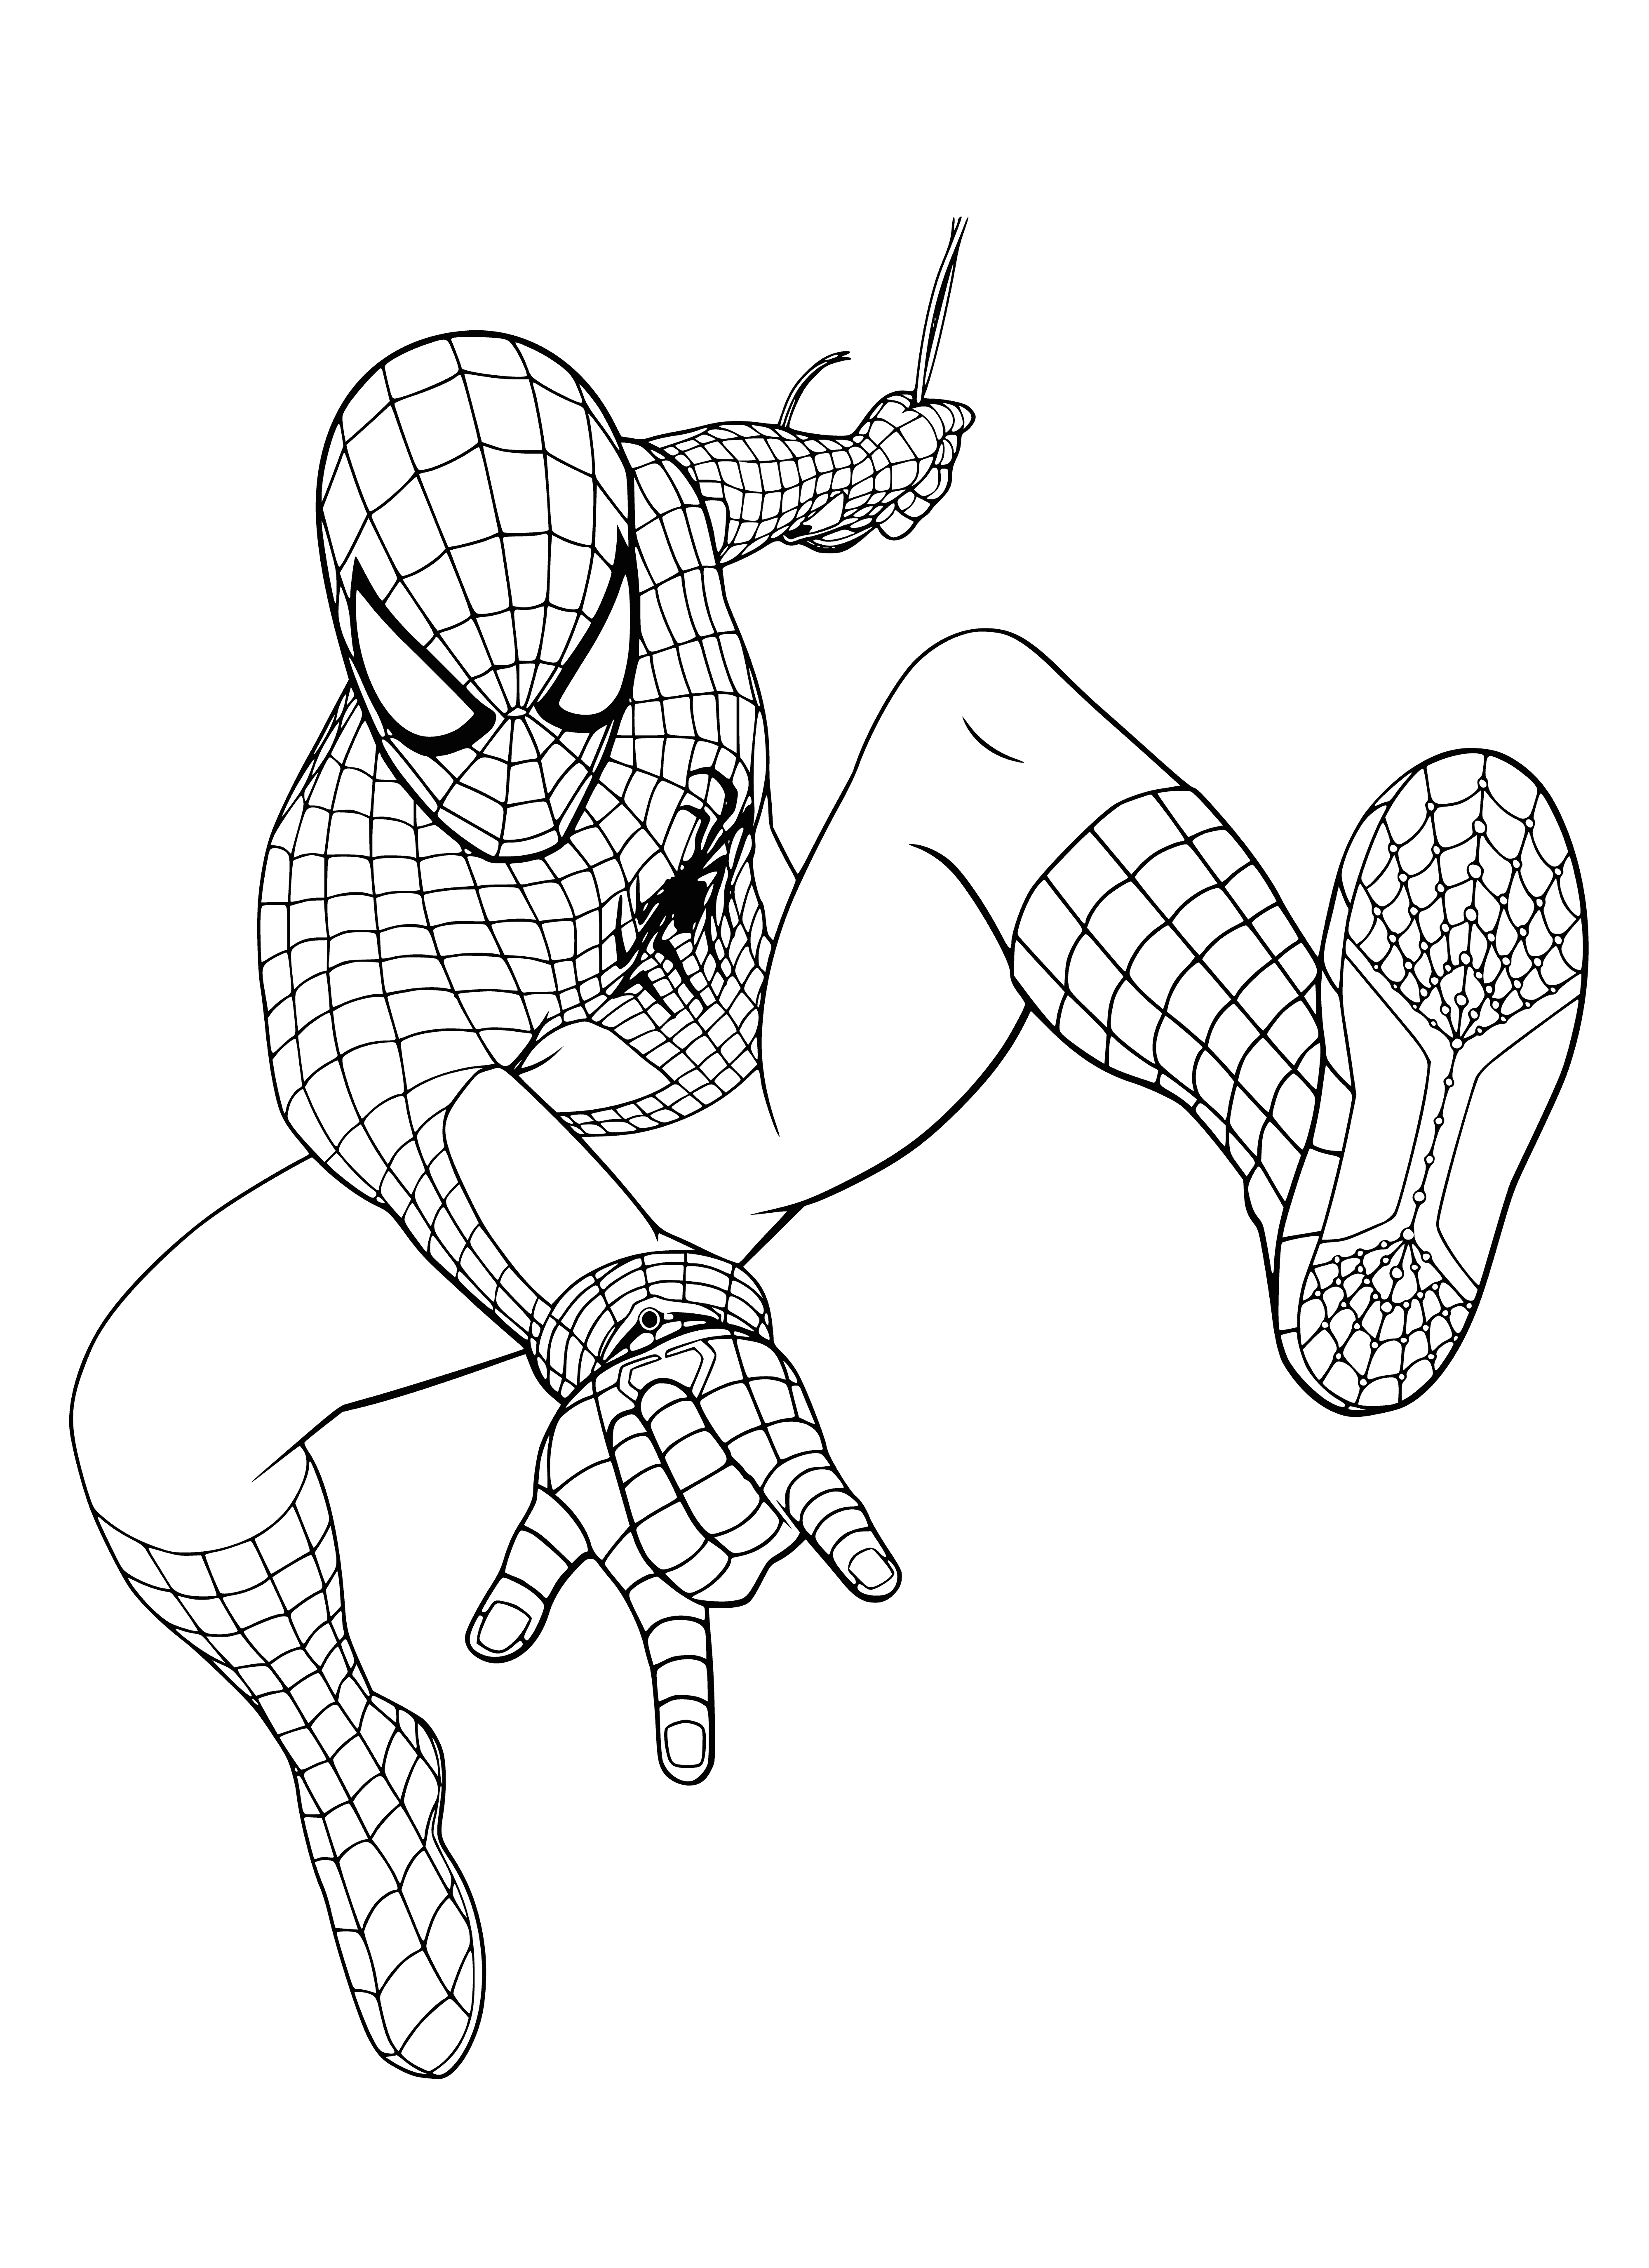 coloring page: Person dressed in spider suit shooting webs from wrists, red mask/spider on chest/back, in front of cityscape.